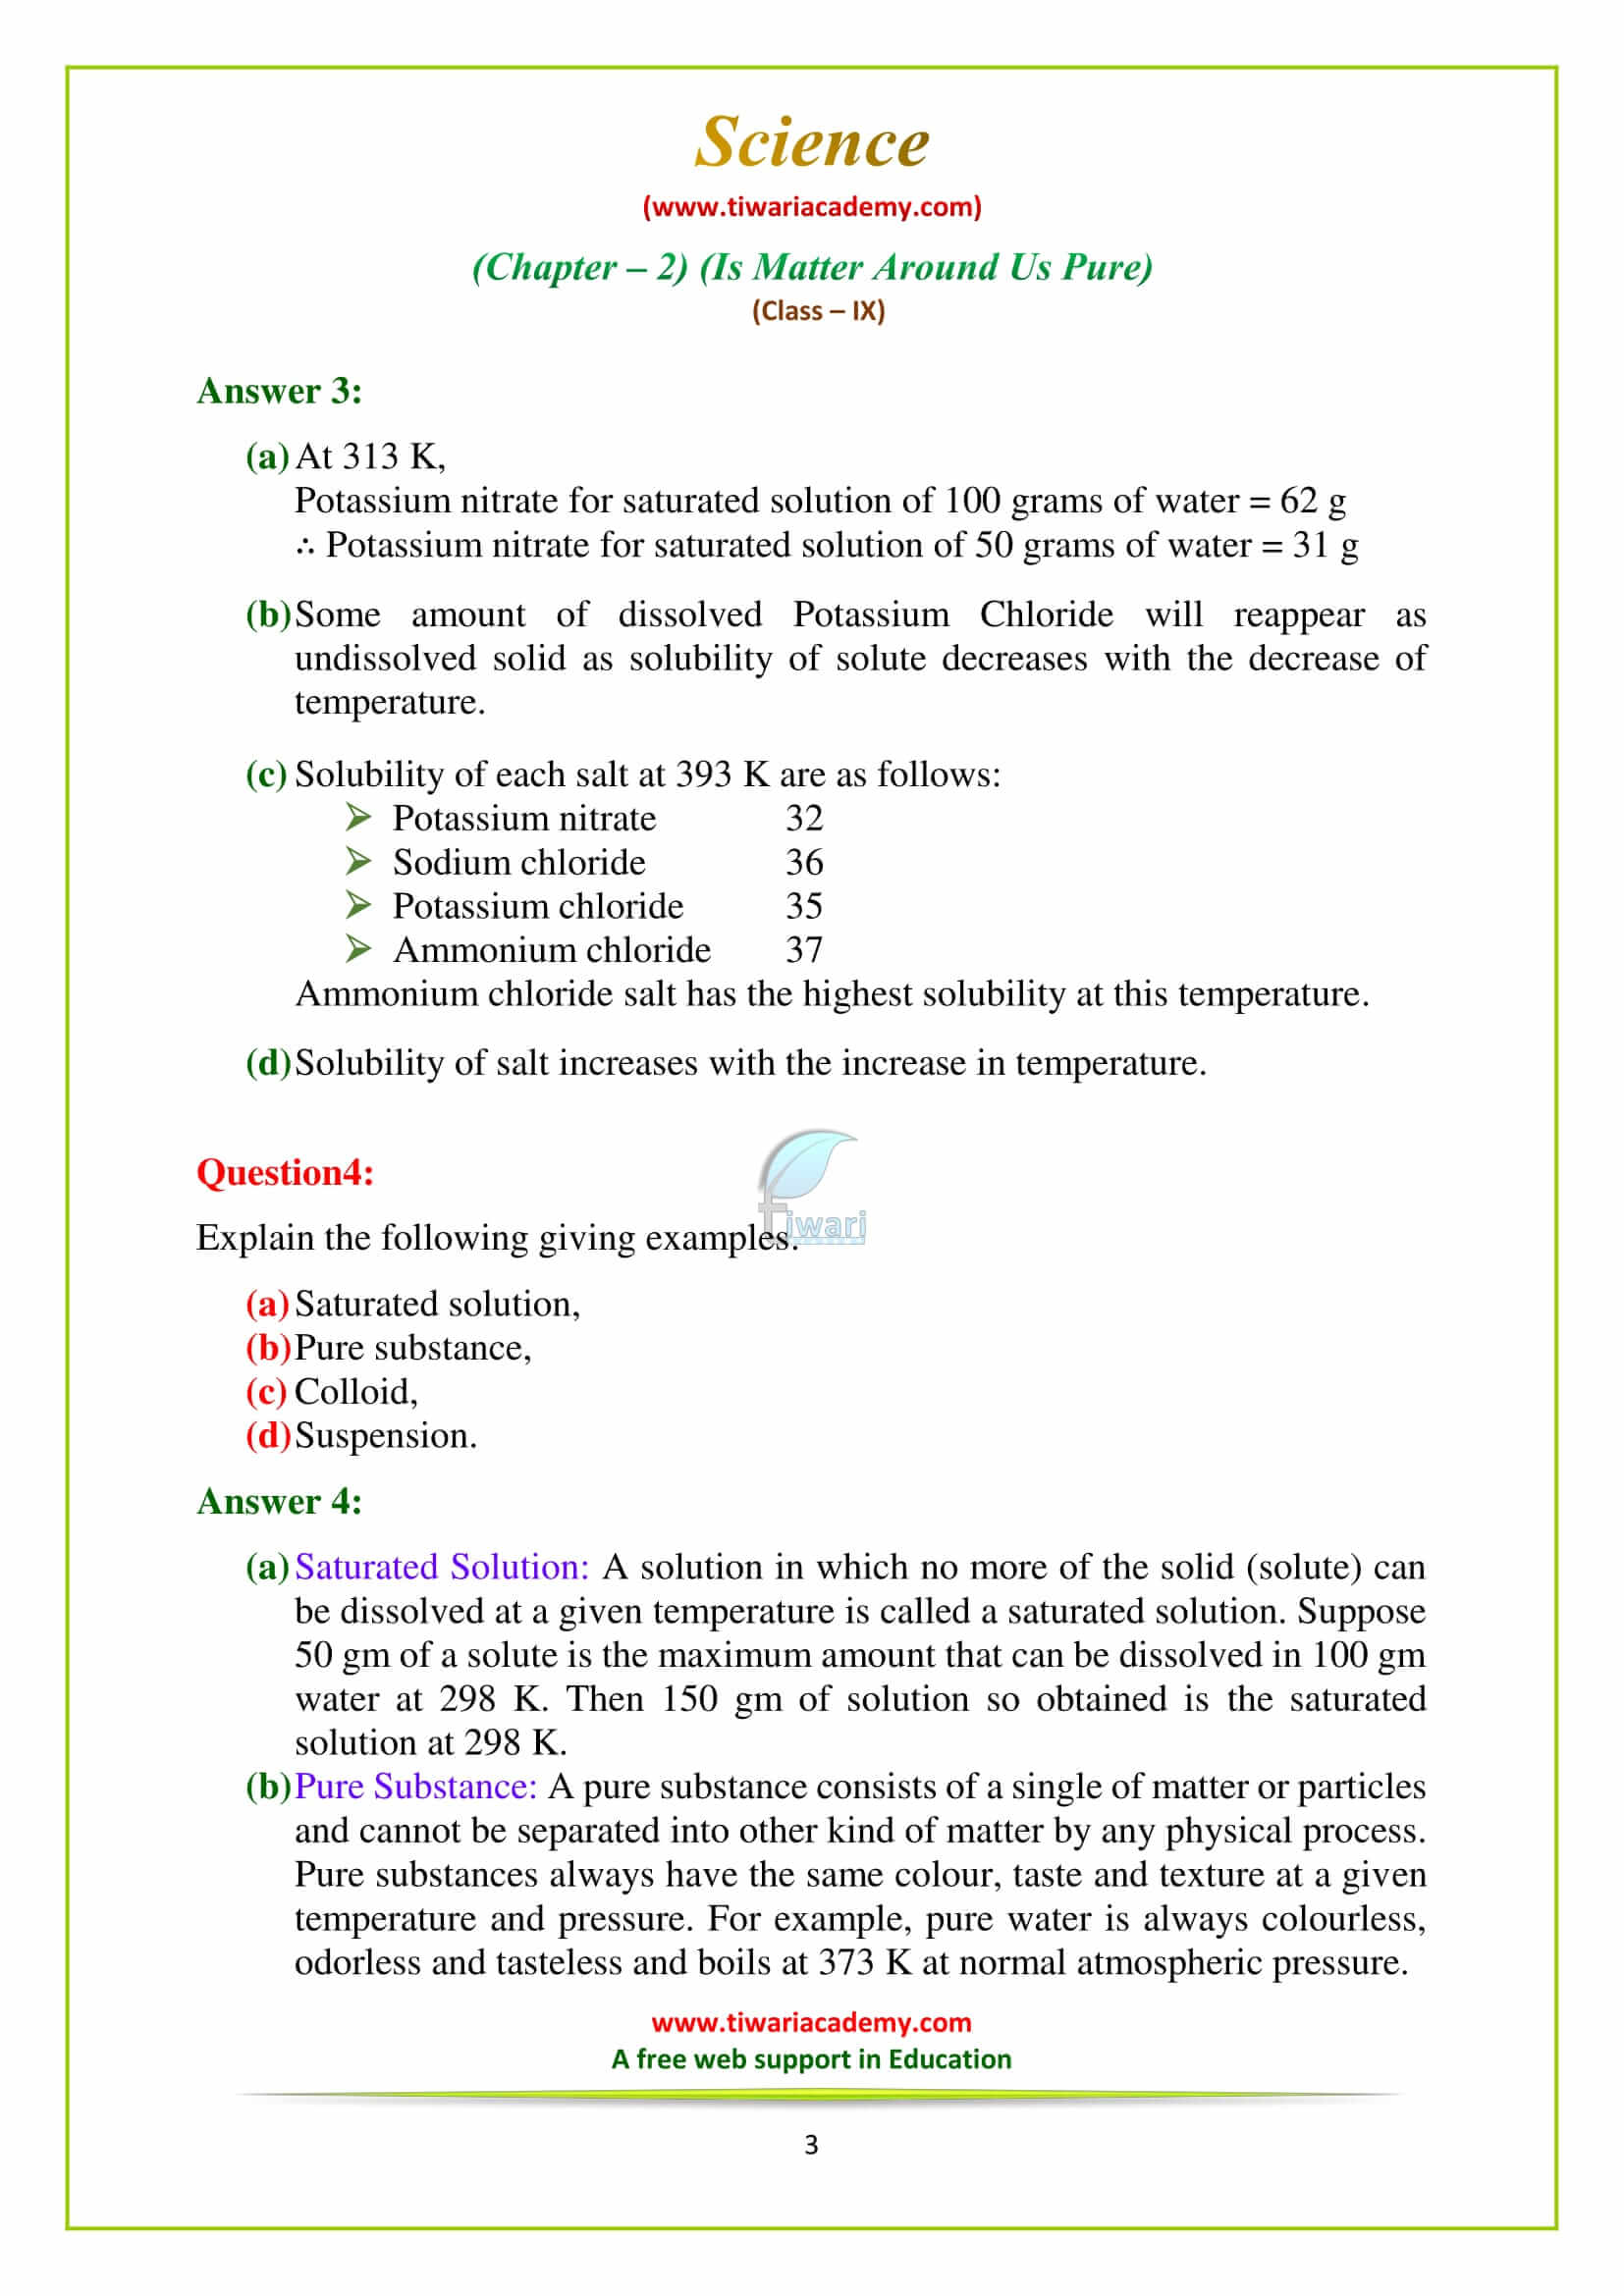 NCERT Solutions for Class 9 Science Chapter 2